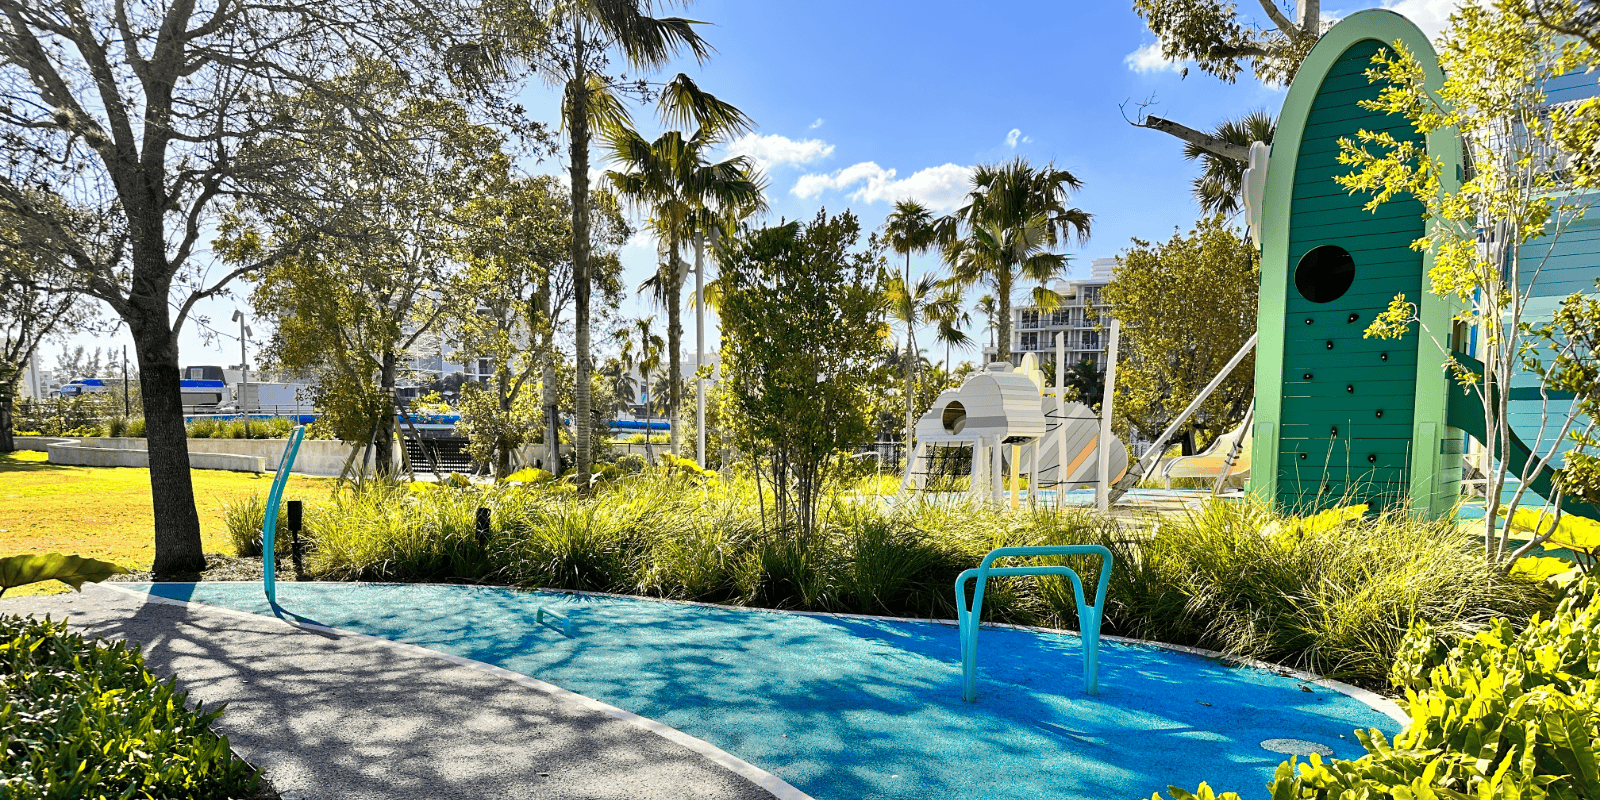 View of the fitness stations and playground at the Bal Harbour Waterfront Park.